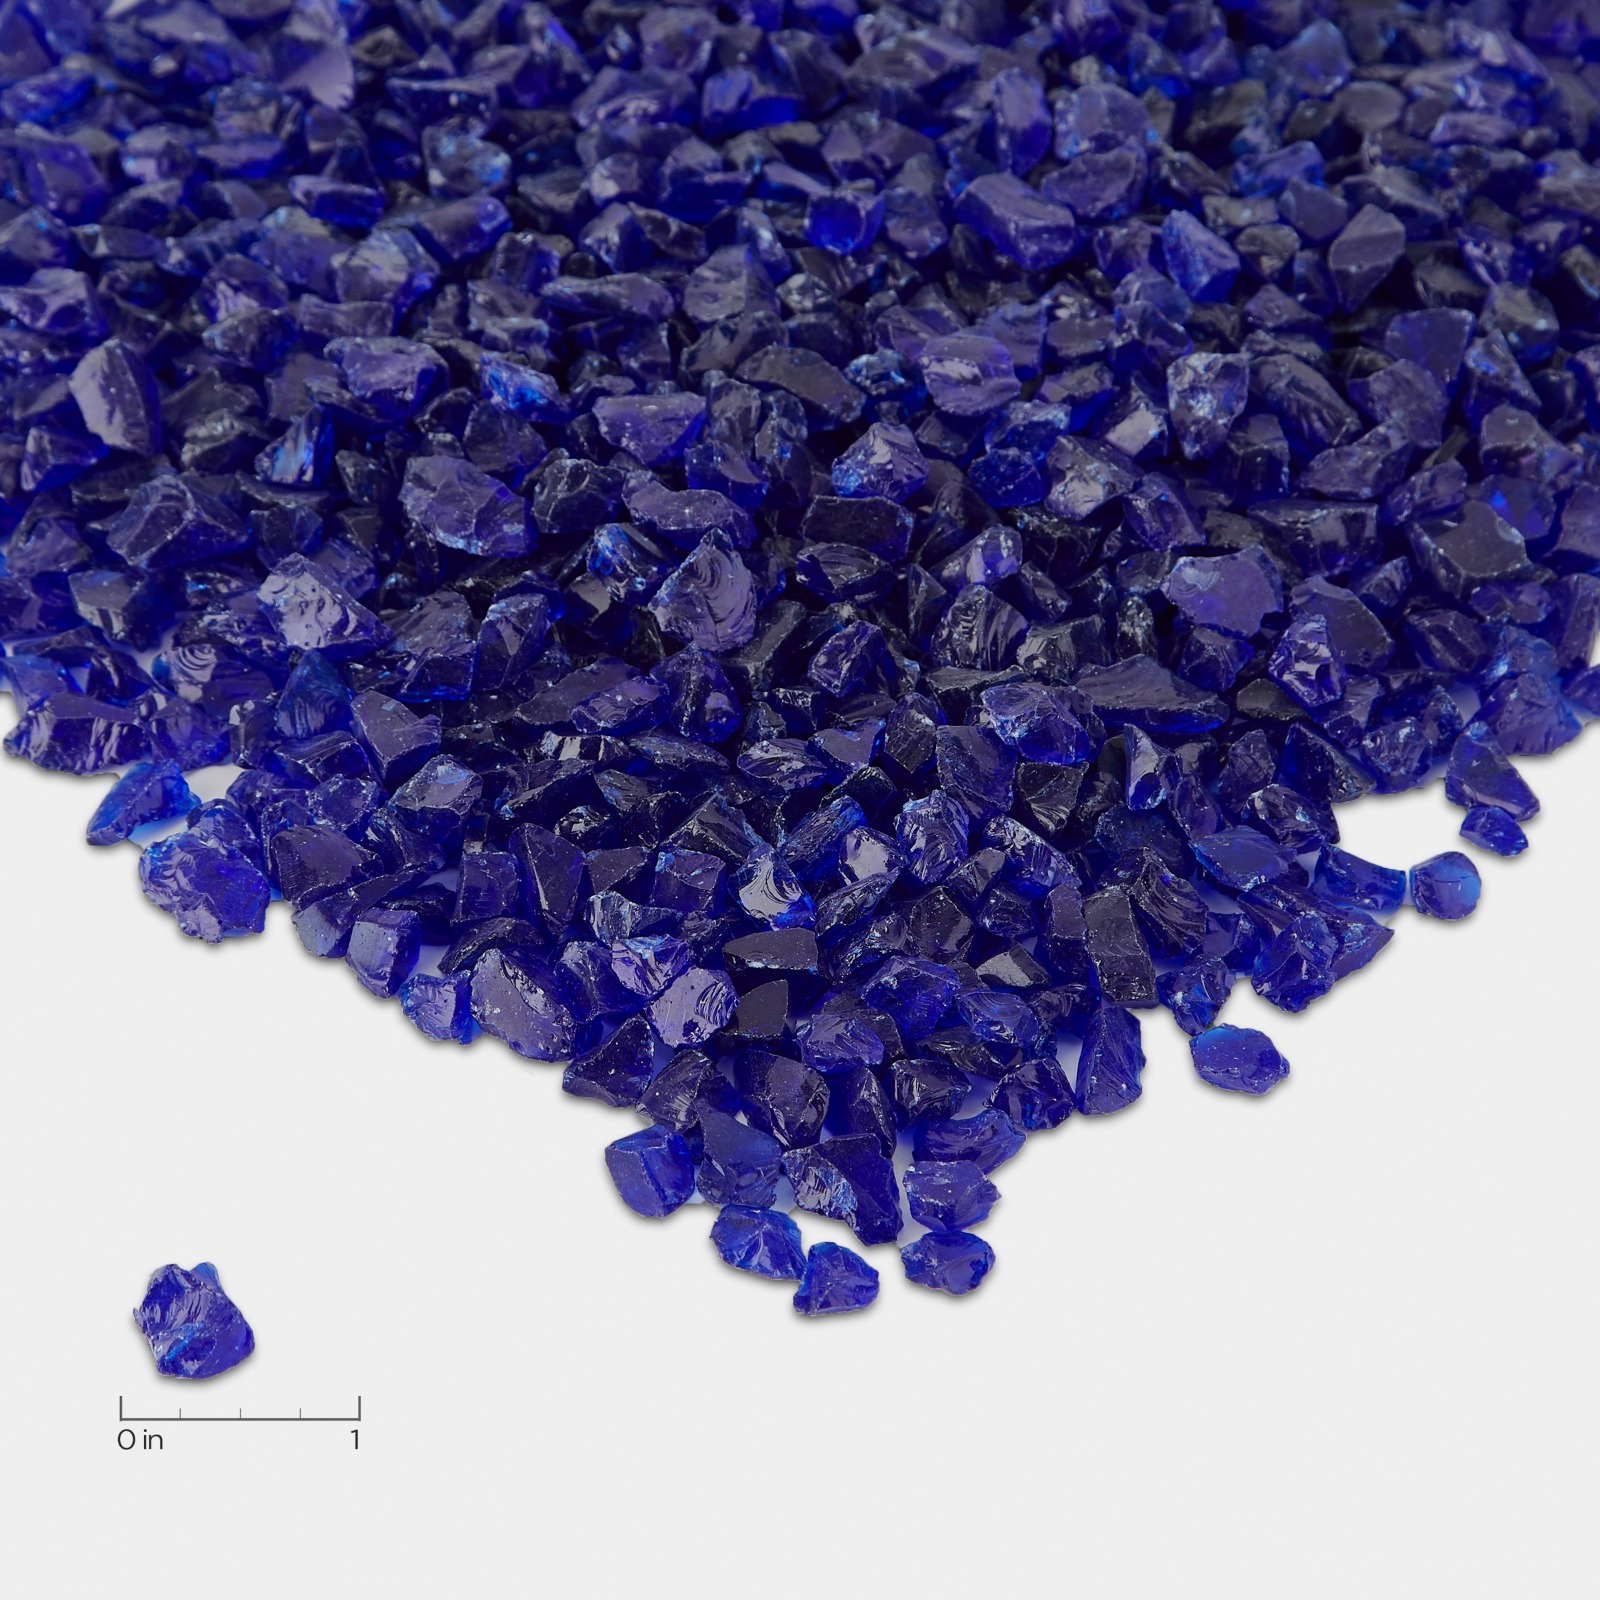 Cobalt Blue Reflective Glass Filler for Fireplace Fire Tables, Fire Pits, and Fire Bowls.